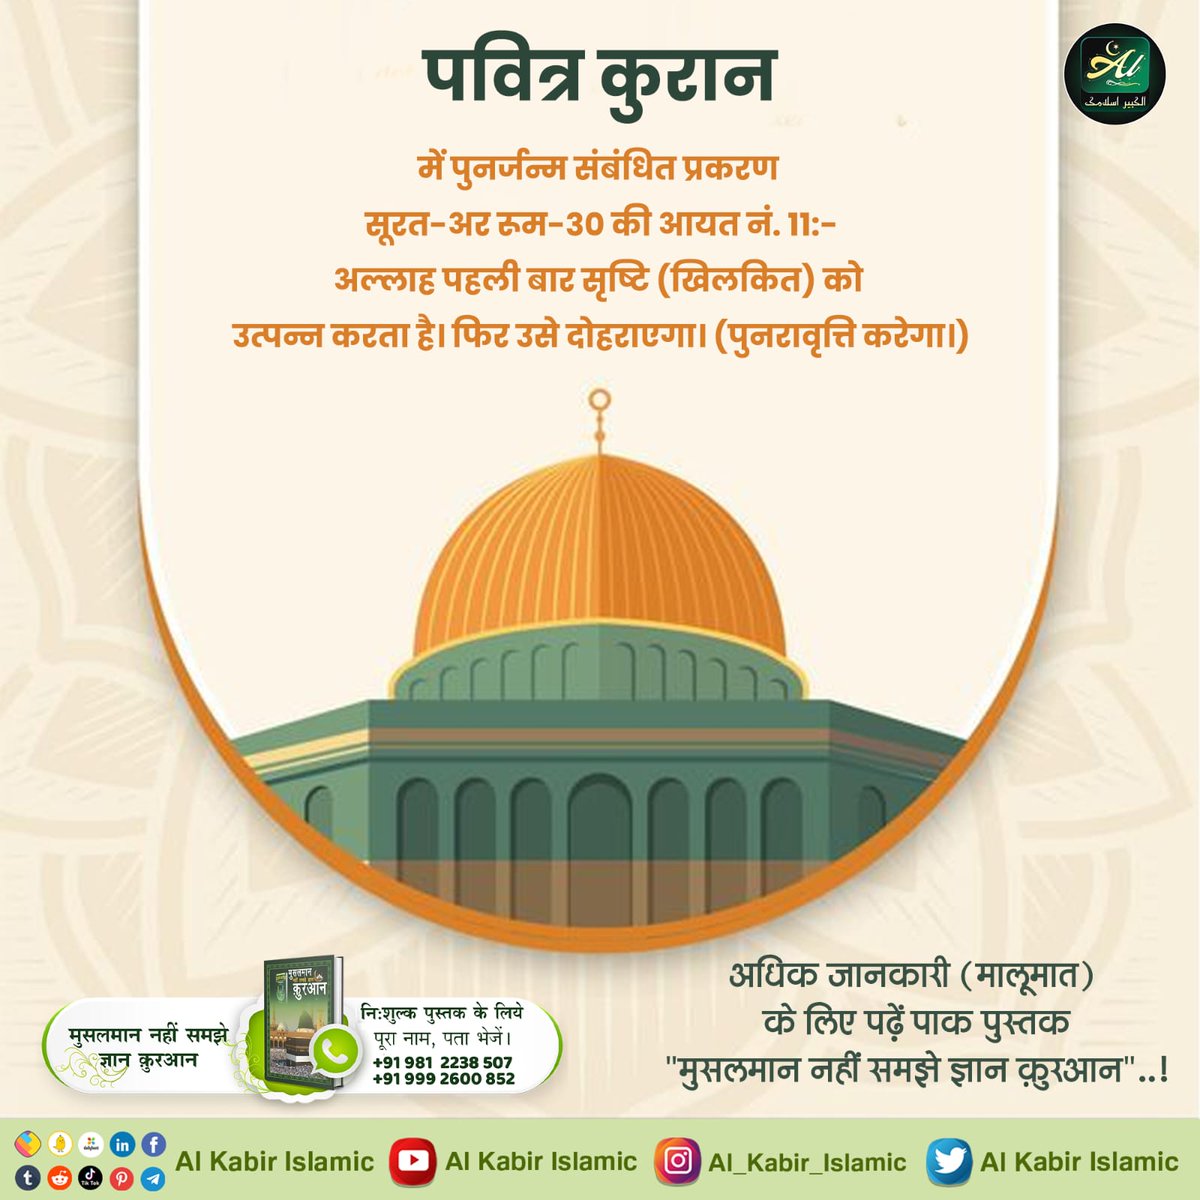 #पुनर्जन्म_का_रहस्य The Holy Quran Chapter related to reincarnation in verse no. of Surat-ar Rum-30. 11:- Allah creates creation (Khilkit) for the first time. Then will repeat it. (Will repeat.) Rebirth In Islam Baakhabar Sant Rampal Ji Maharaj